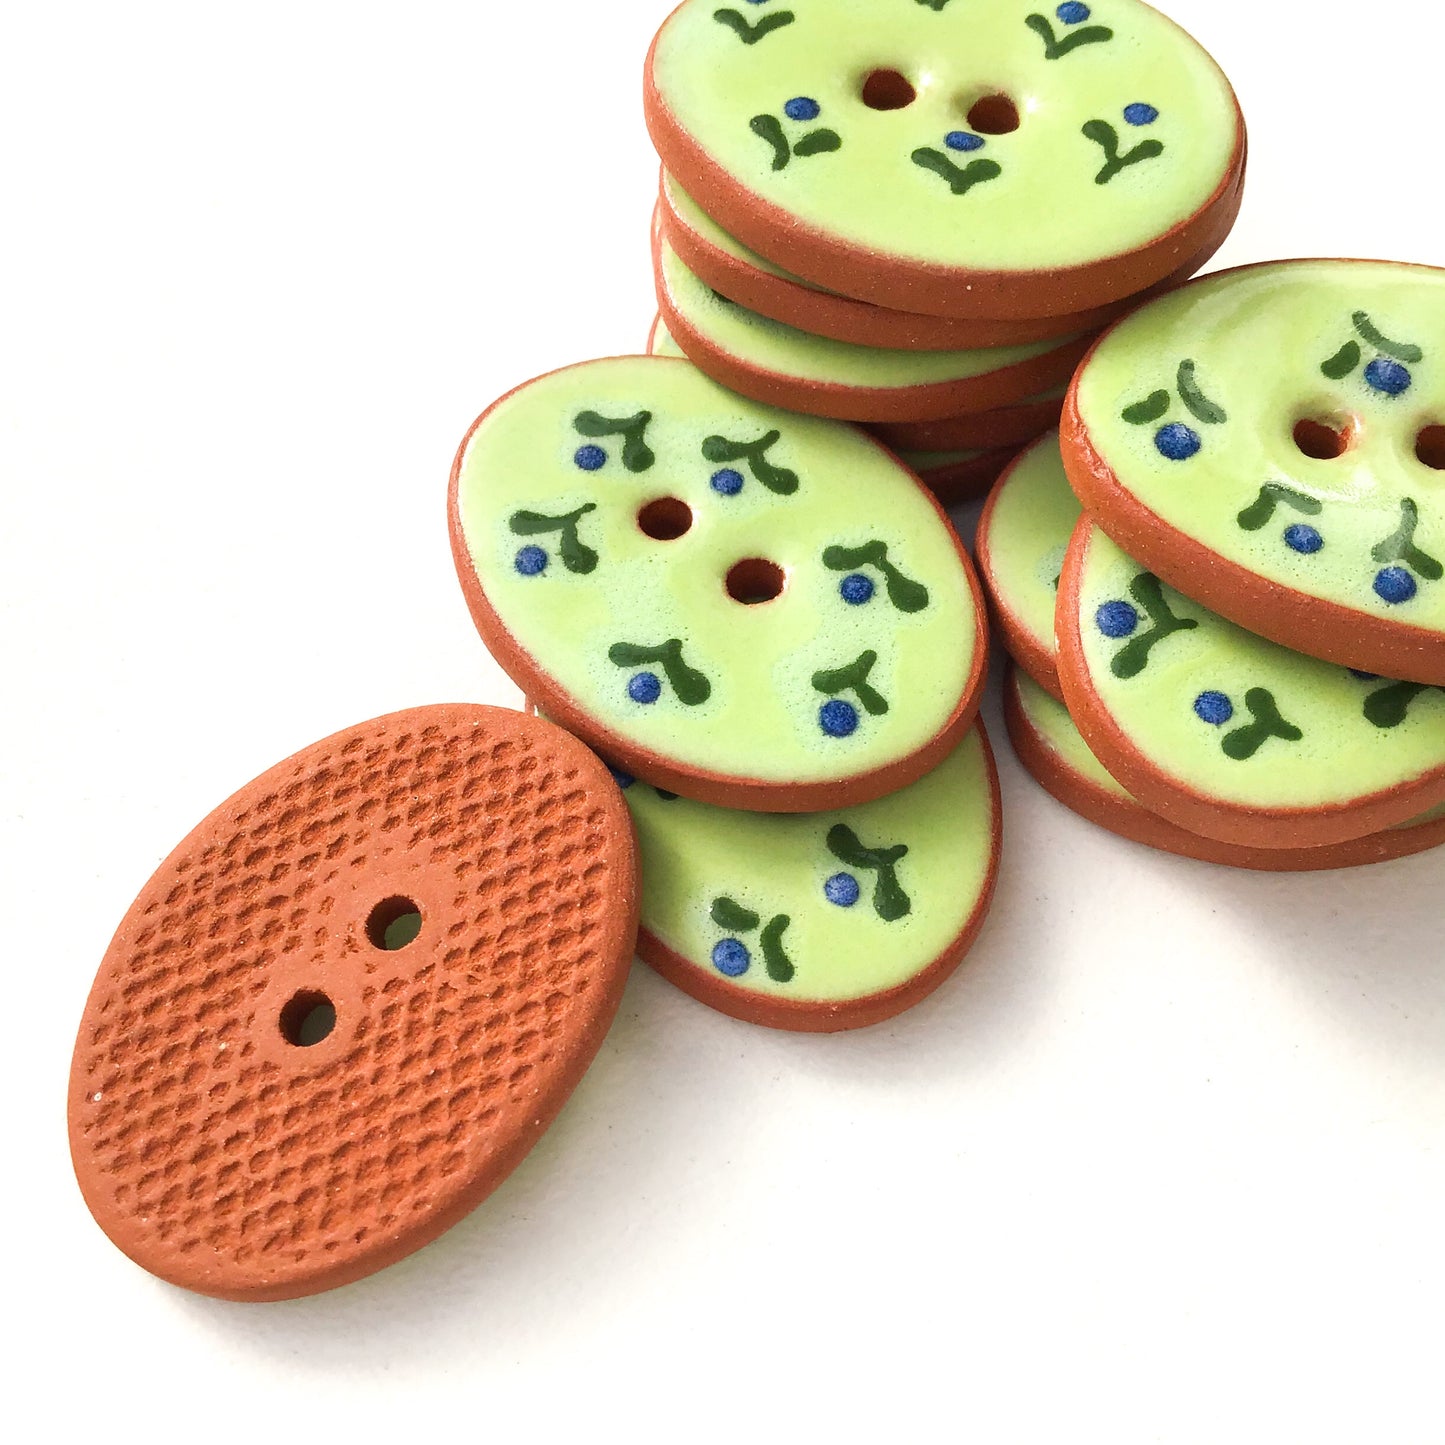 Green Ceramic Buttons with Small Blue Flowers - Oval Clay Buttons - 3/4" x 1 1/16" - 6 Pack (ws-95)